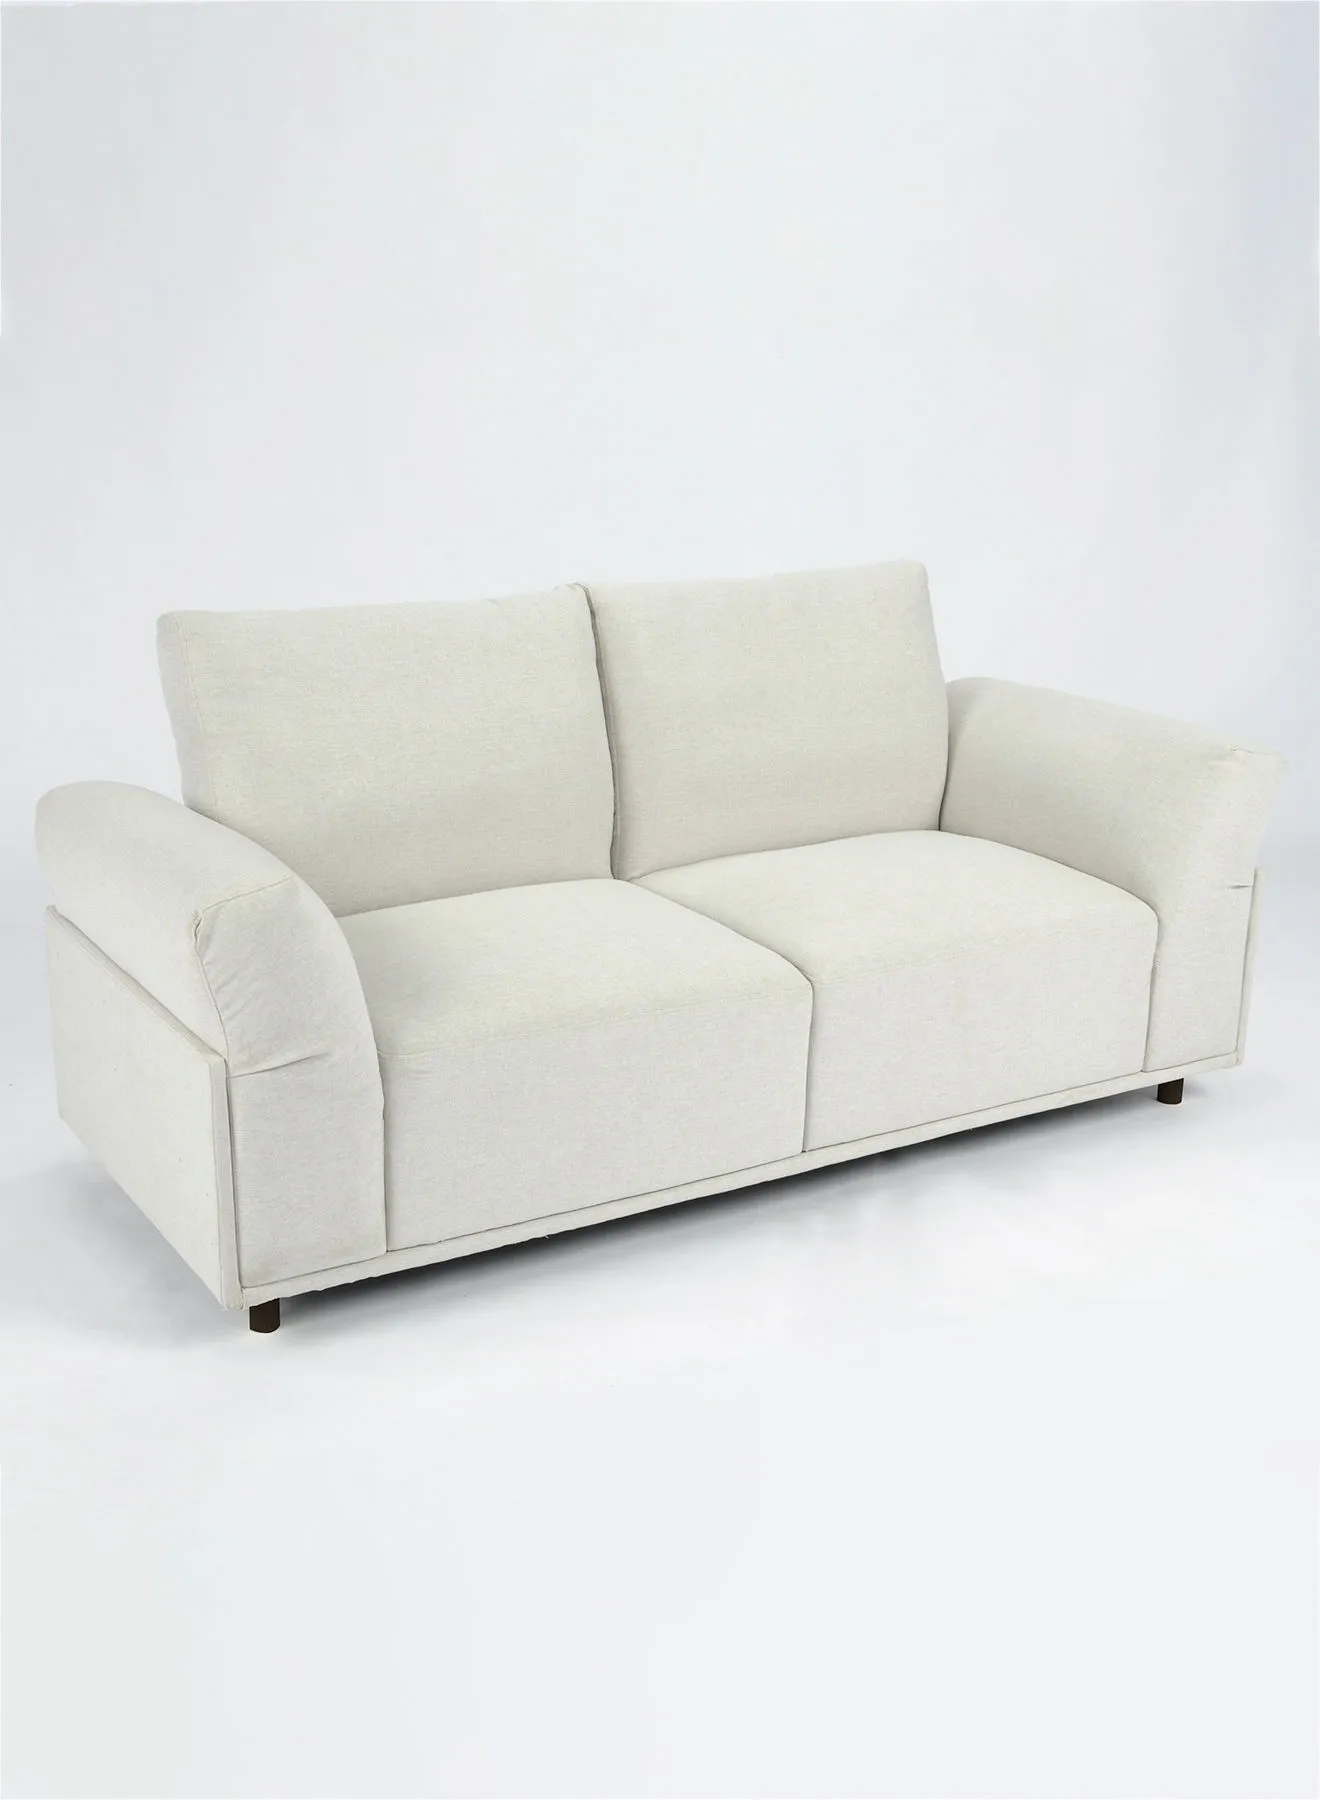 Switch Sofa - Upholstered Fabric Wooden White Couch - 187X91X97 - 2 Seater Sofa Relaxing Sofa